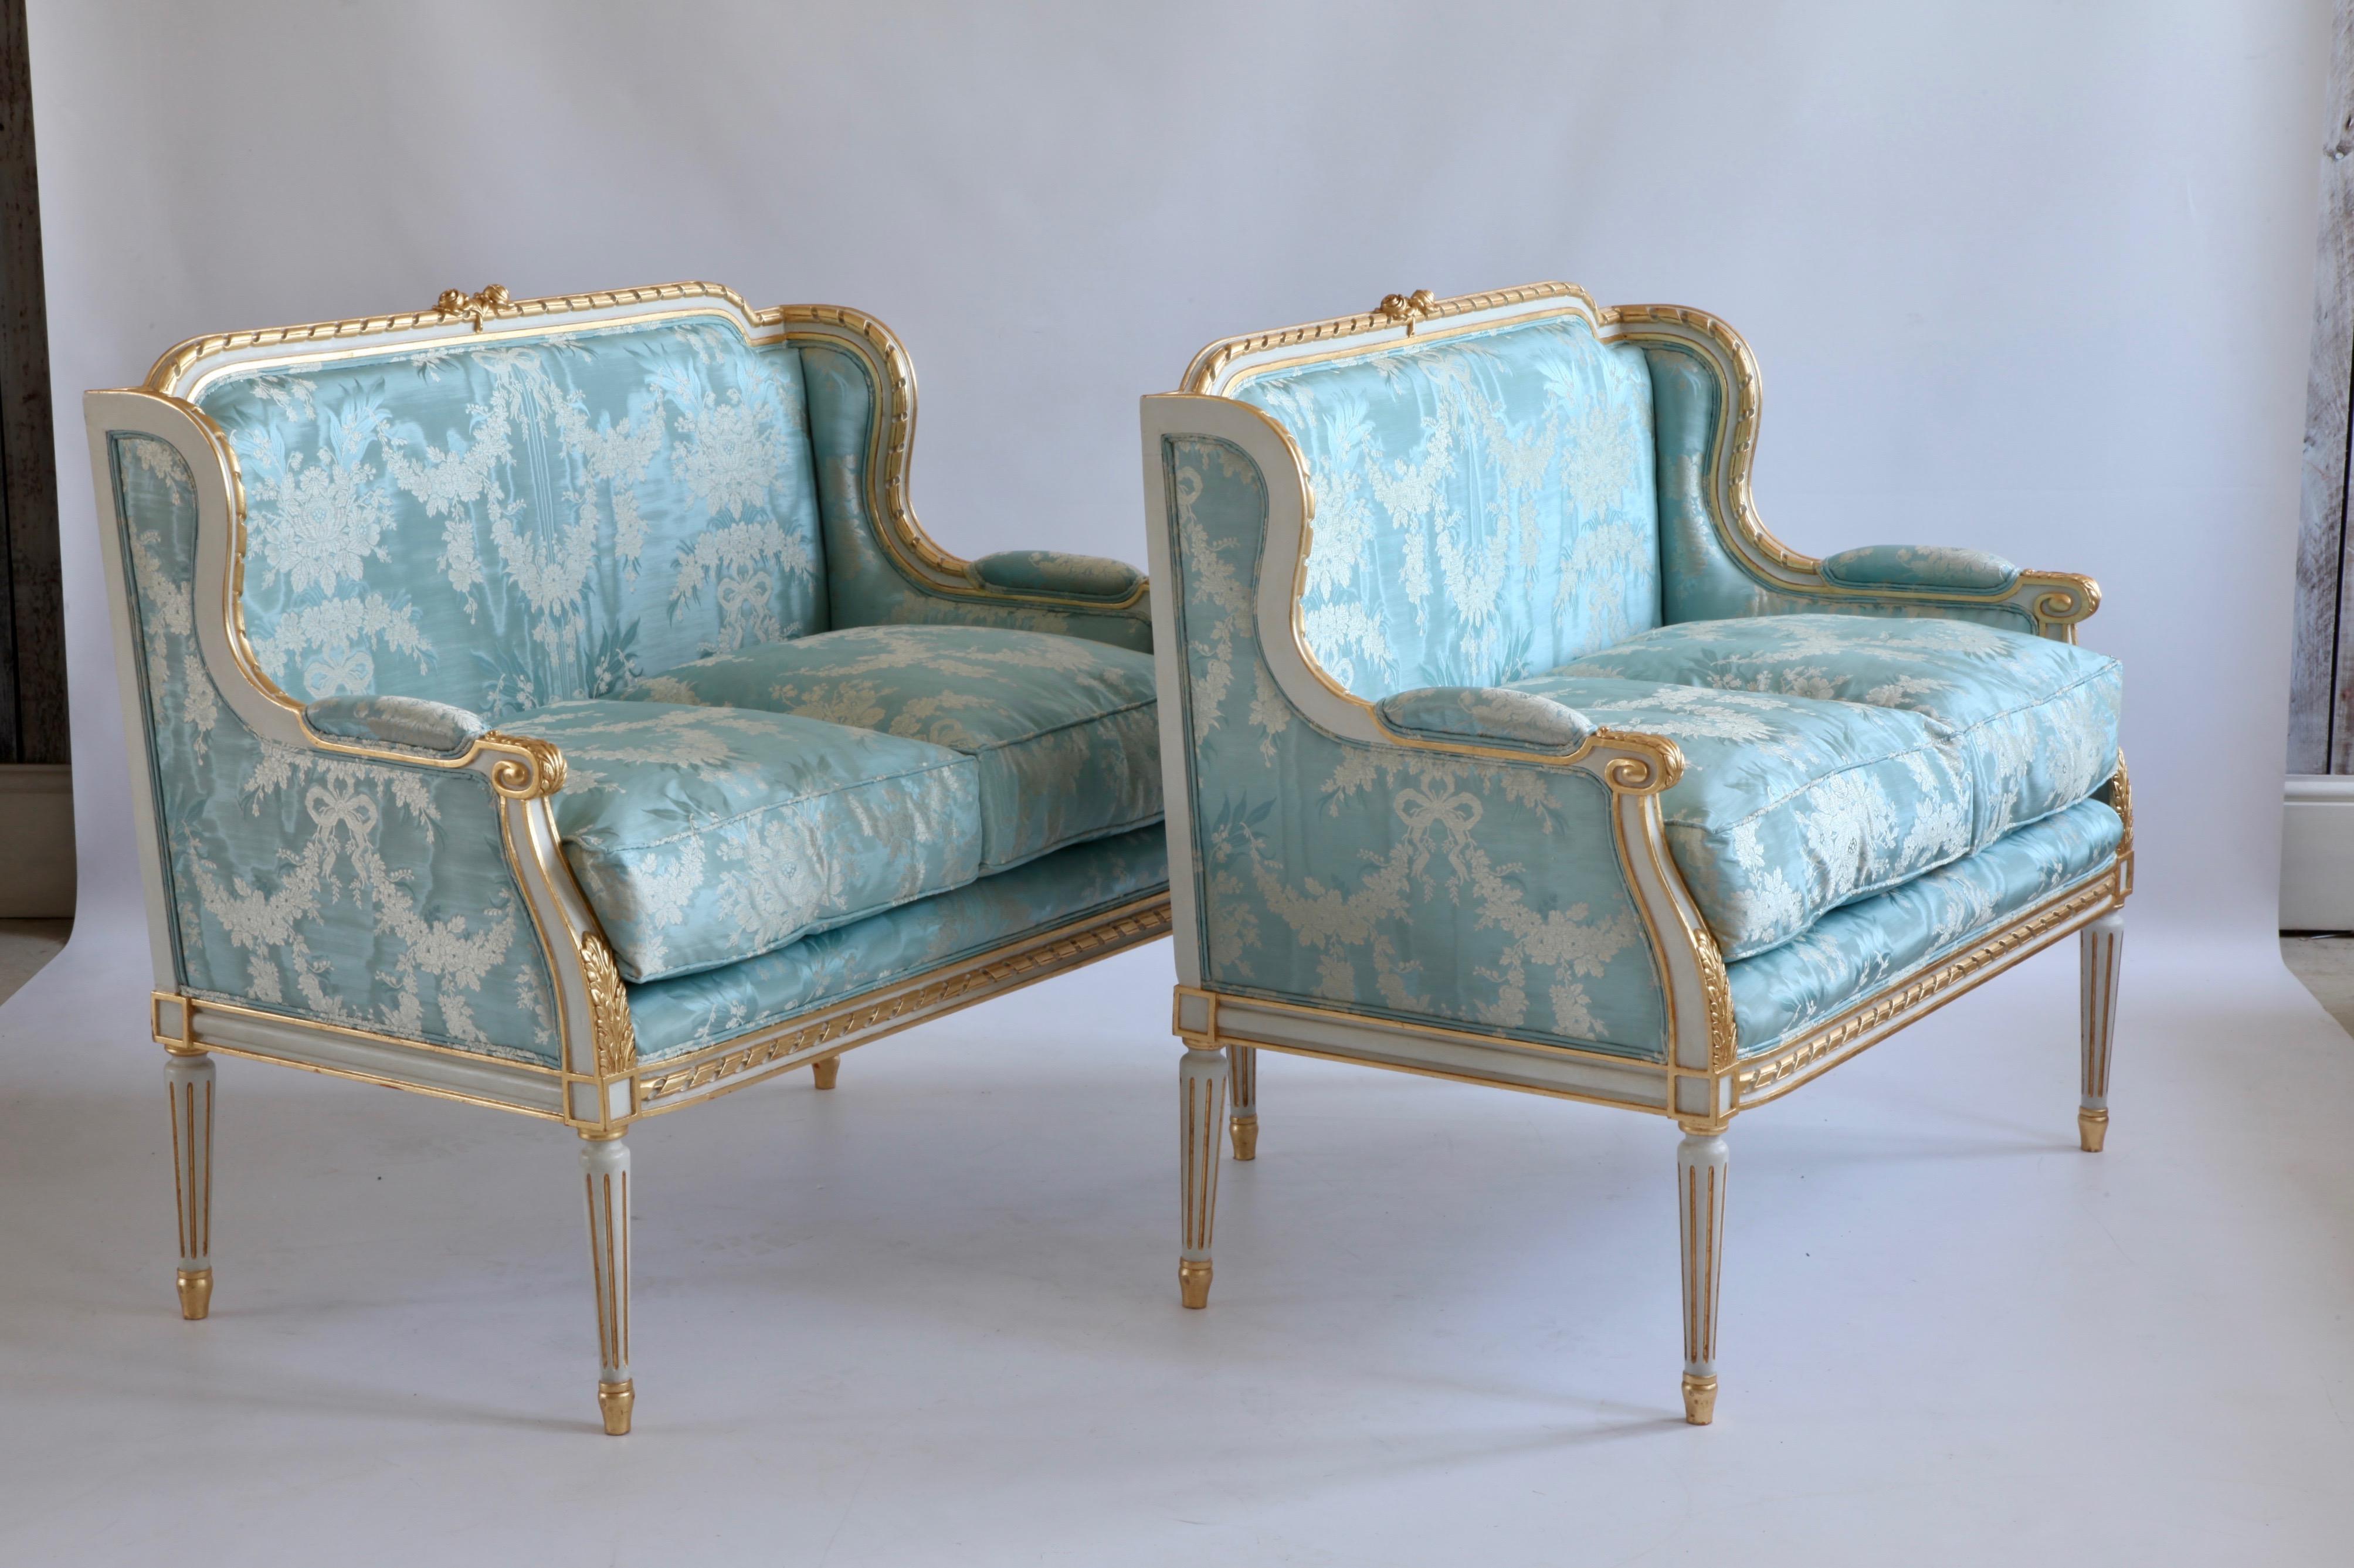 Hand-Crafted Louis XVI Style Sofa For Sale